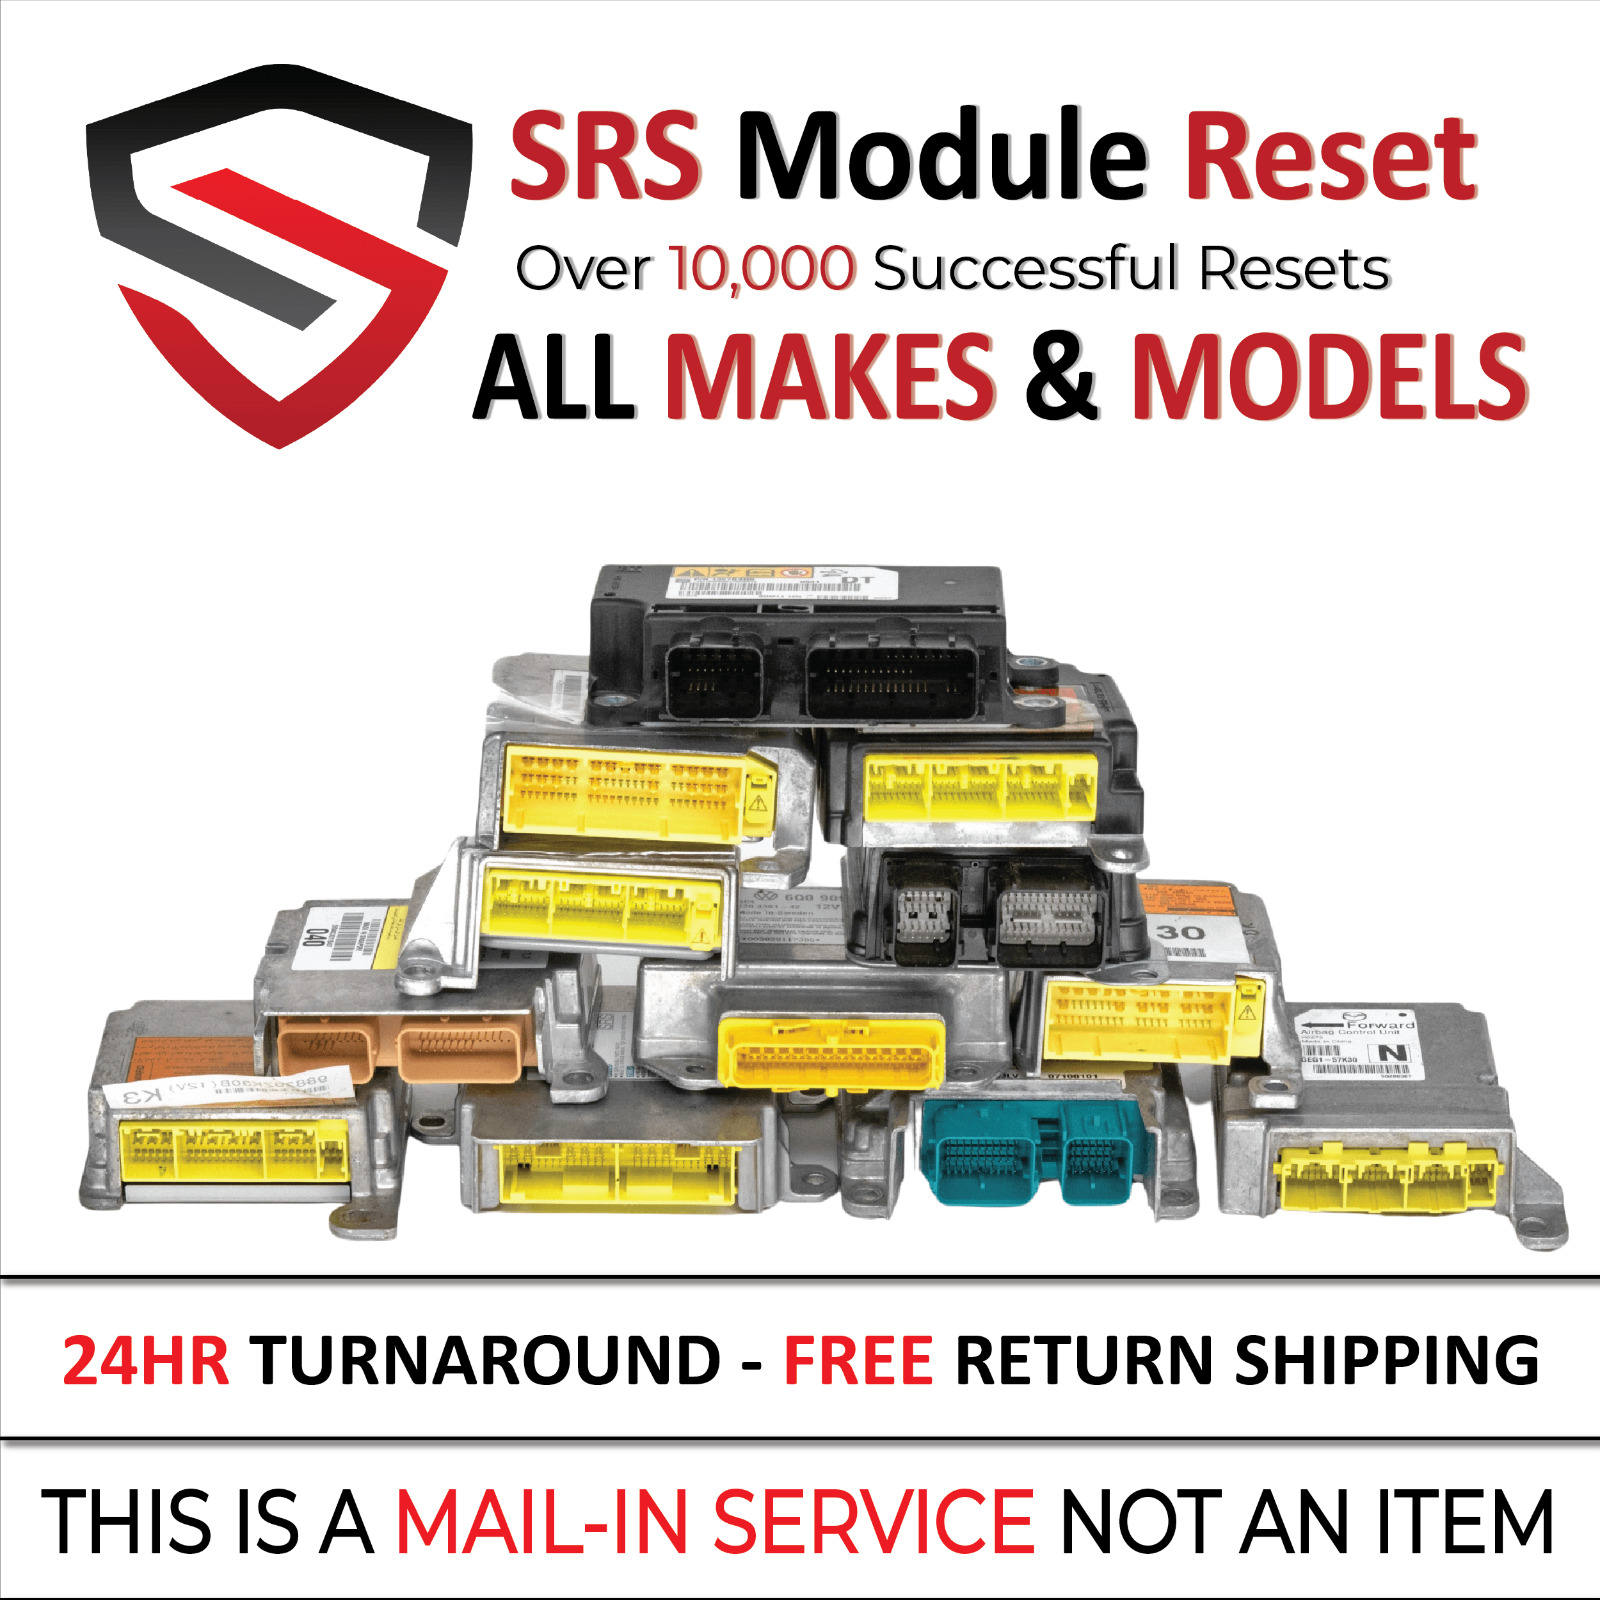 For Infiniti SRS Module Reset Service - Guaranteed or Your Money Back